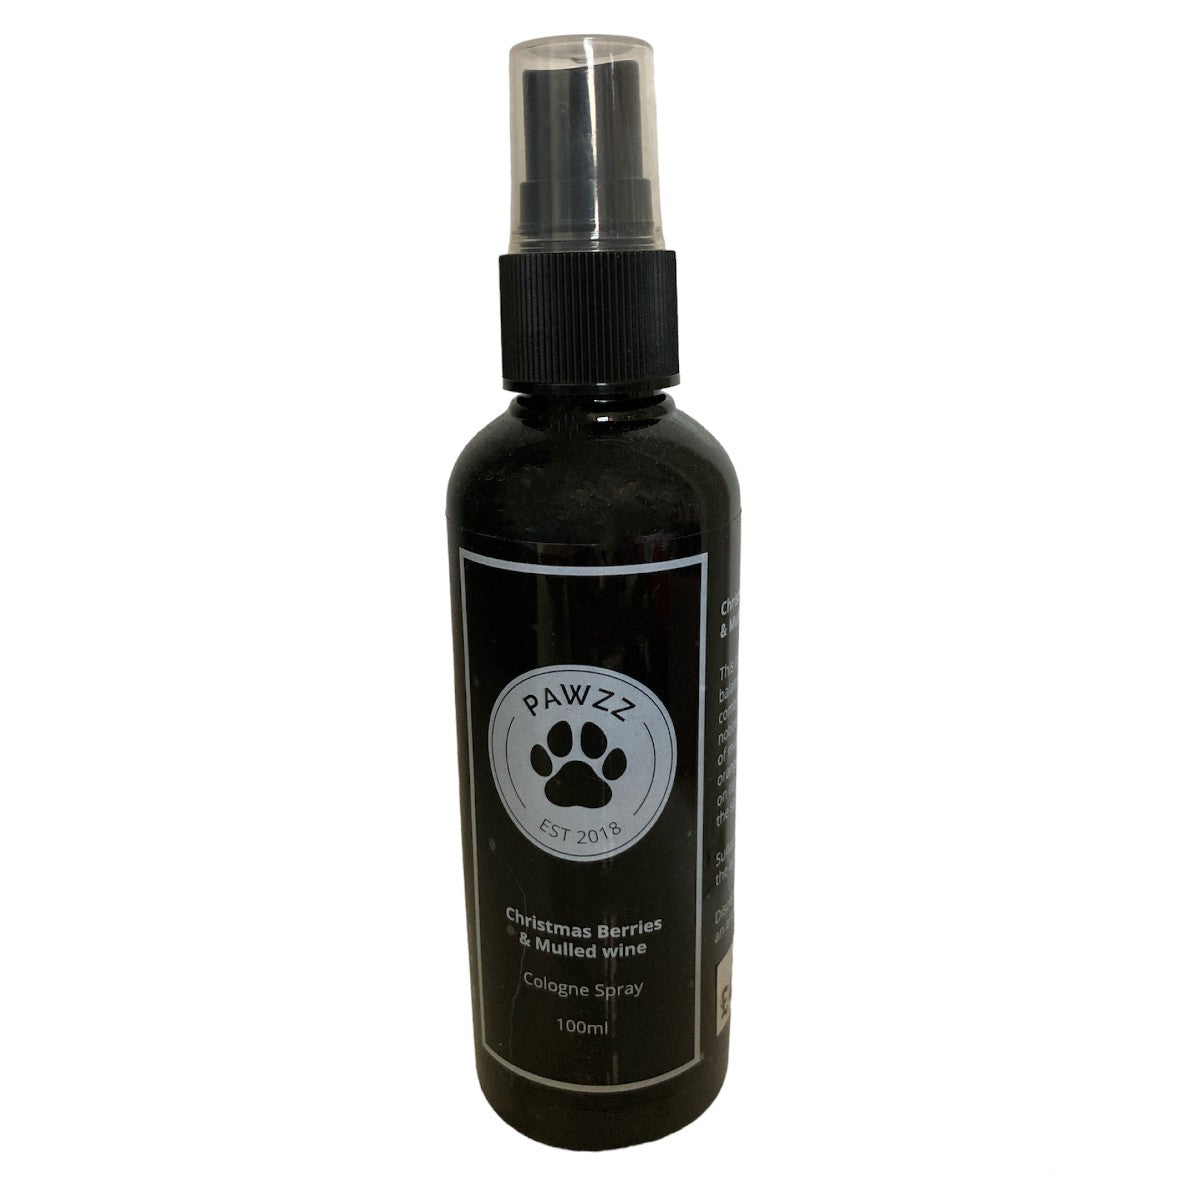 Pawzz Christmas Berries &amp; Mulled Wine Fragrance